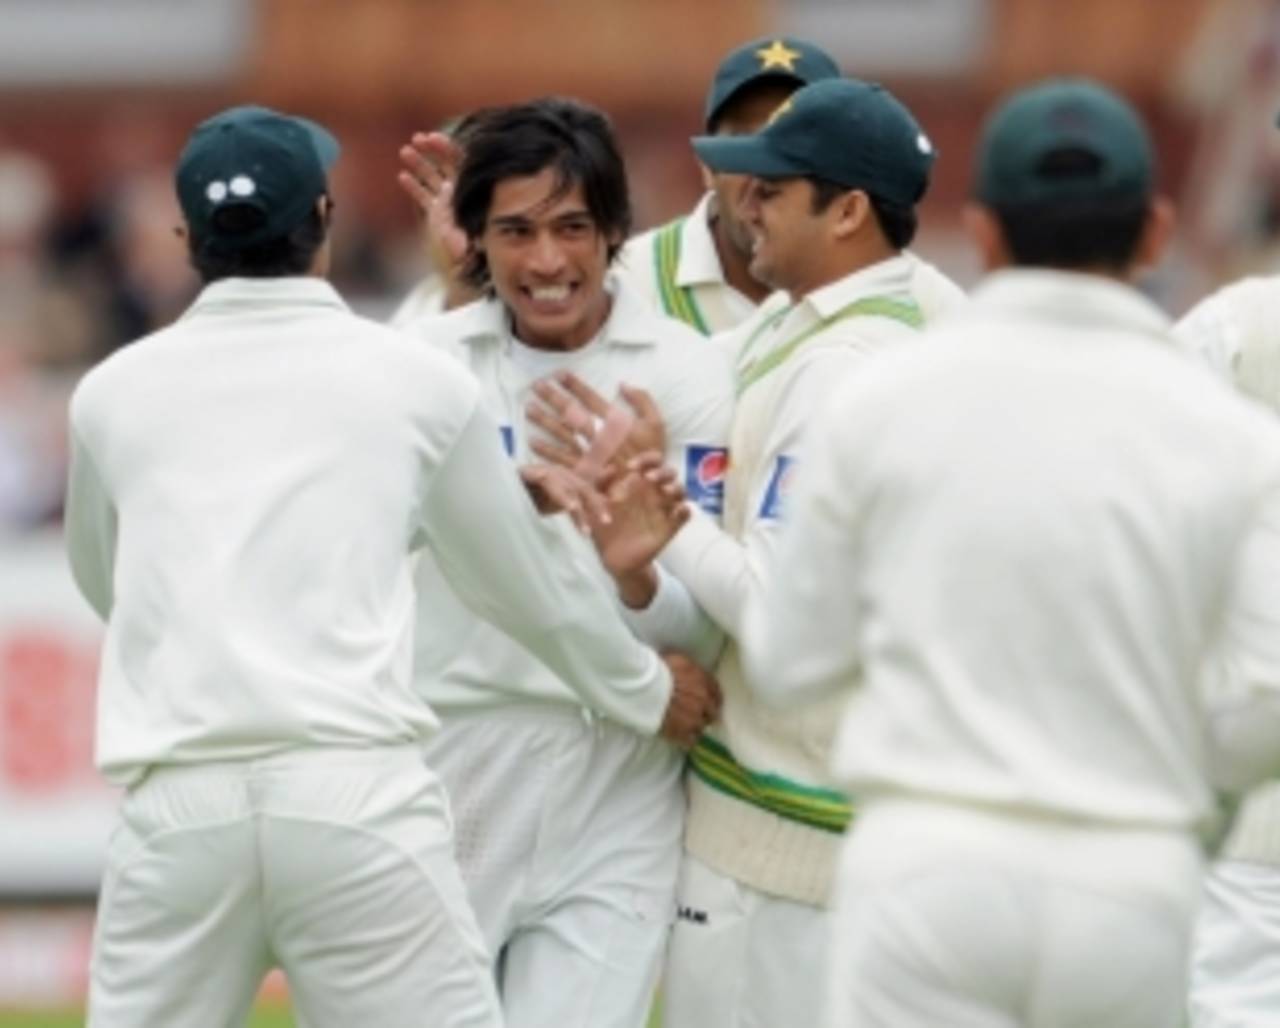 Mohammad Amir is swamped by his team-mates in the midst of his successful spell, England v Pakistan, 4th npower Test, Lord's, August 27 2010